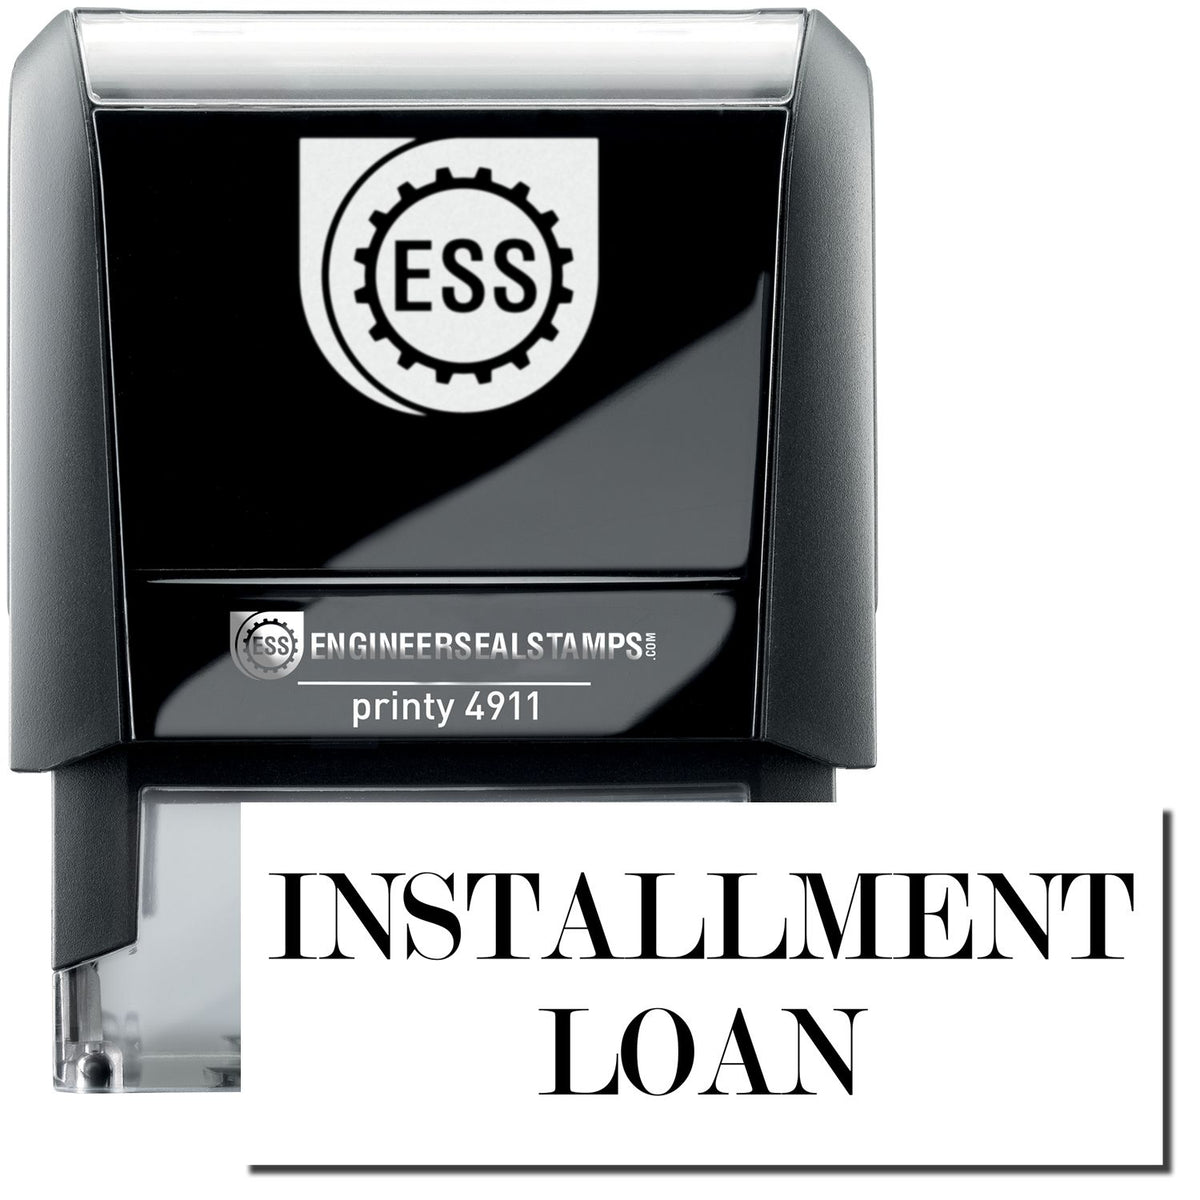 A self-inking stamp with a stamped image showing how the text &quot;INSTALLMENT LOAN&quot; is displayed after stamping.